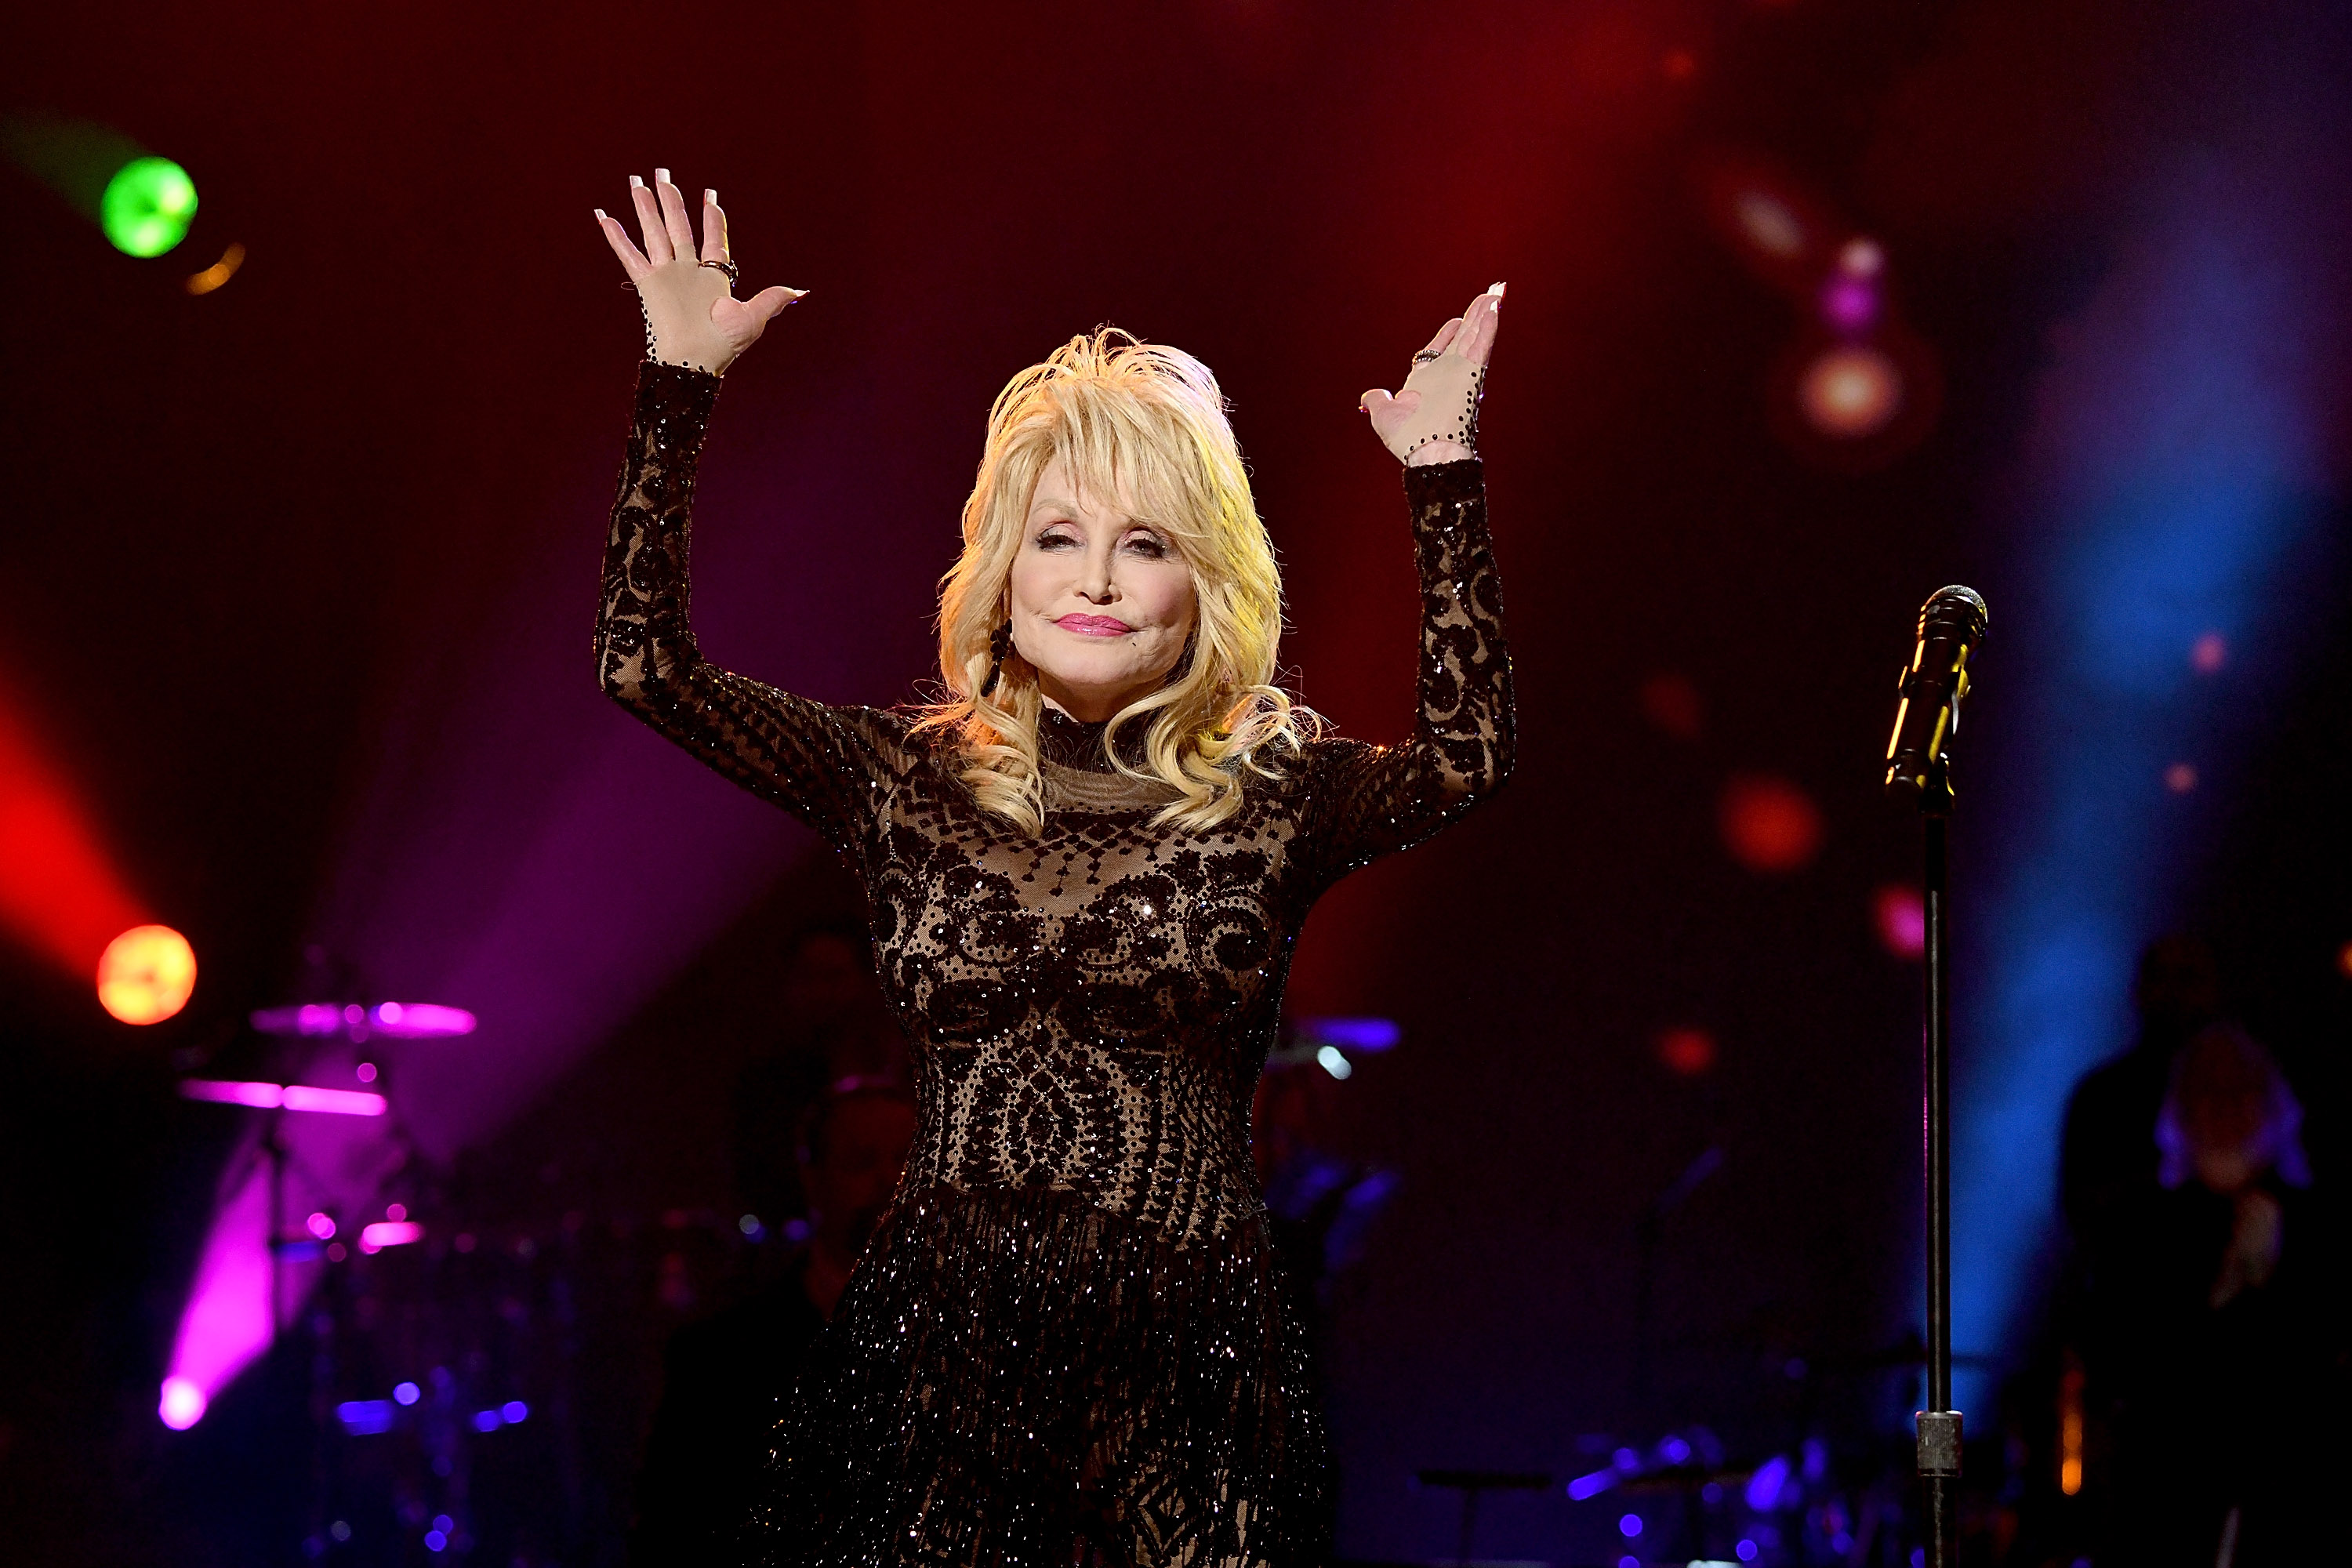 Dolly Parton performs onstage during MusiCares Person of the Year honoring Dolly Parton at the Los Angeles Convention Center.